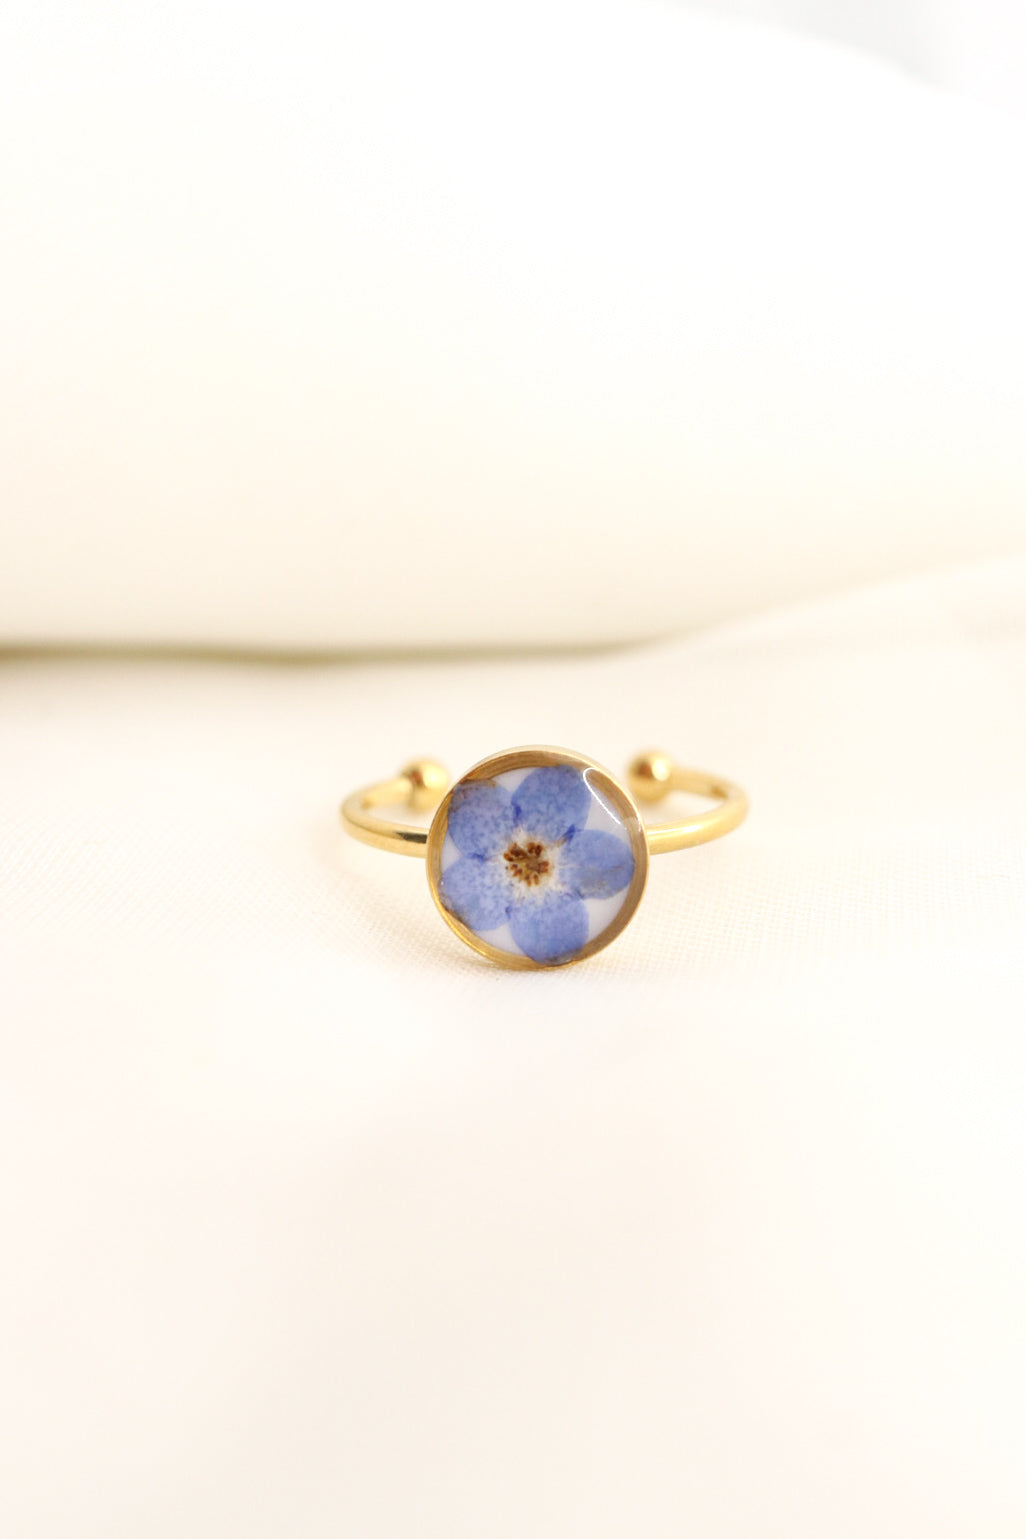 Forget Me Not Wildflower Resin Ring, Adjustable Blue Pressed Flower Ring, Blue Blossom Botanical Ring Christmas Gift For Her Copy